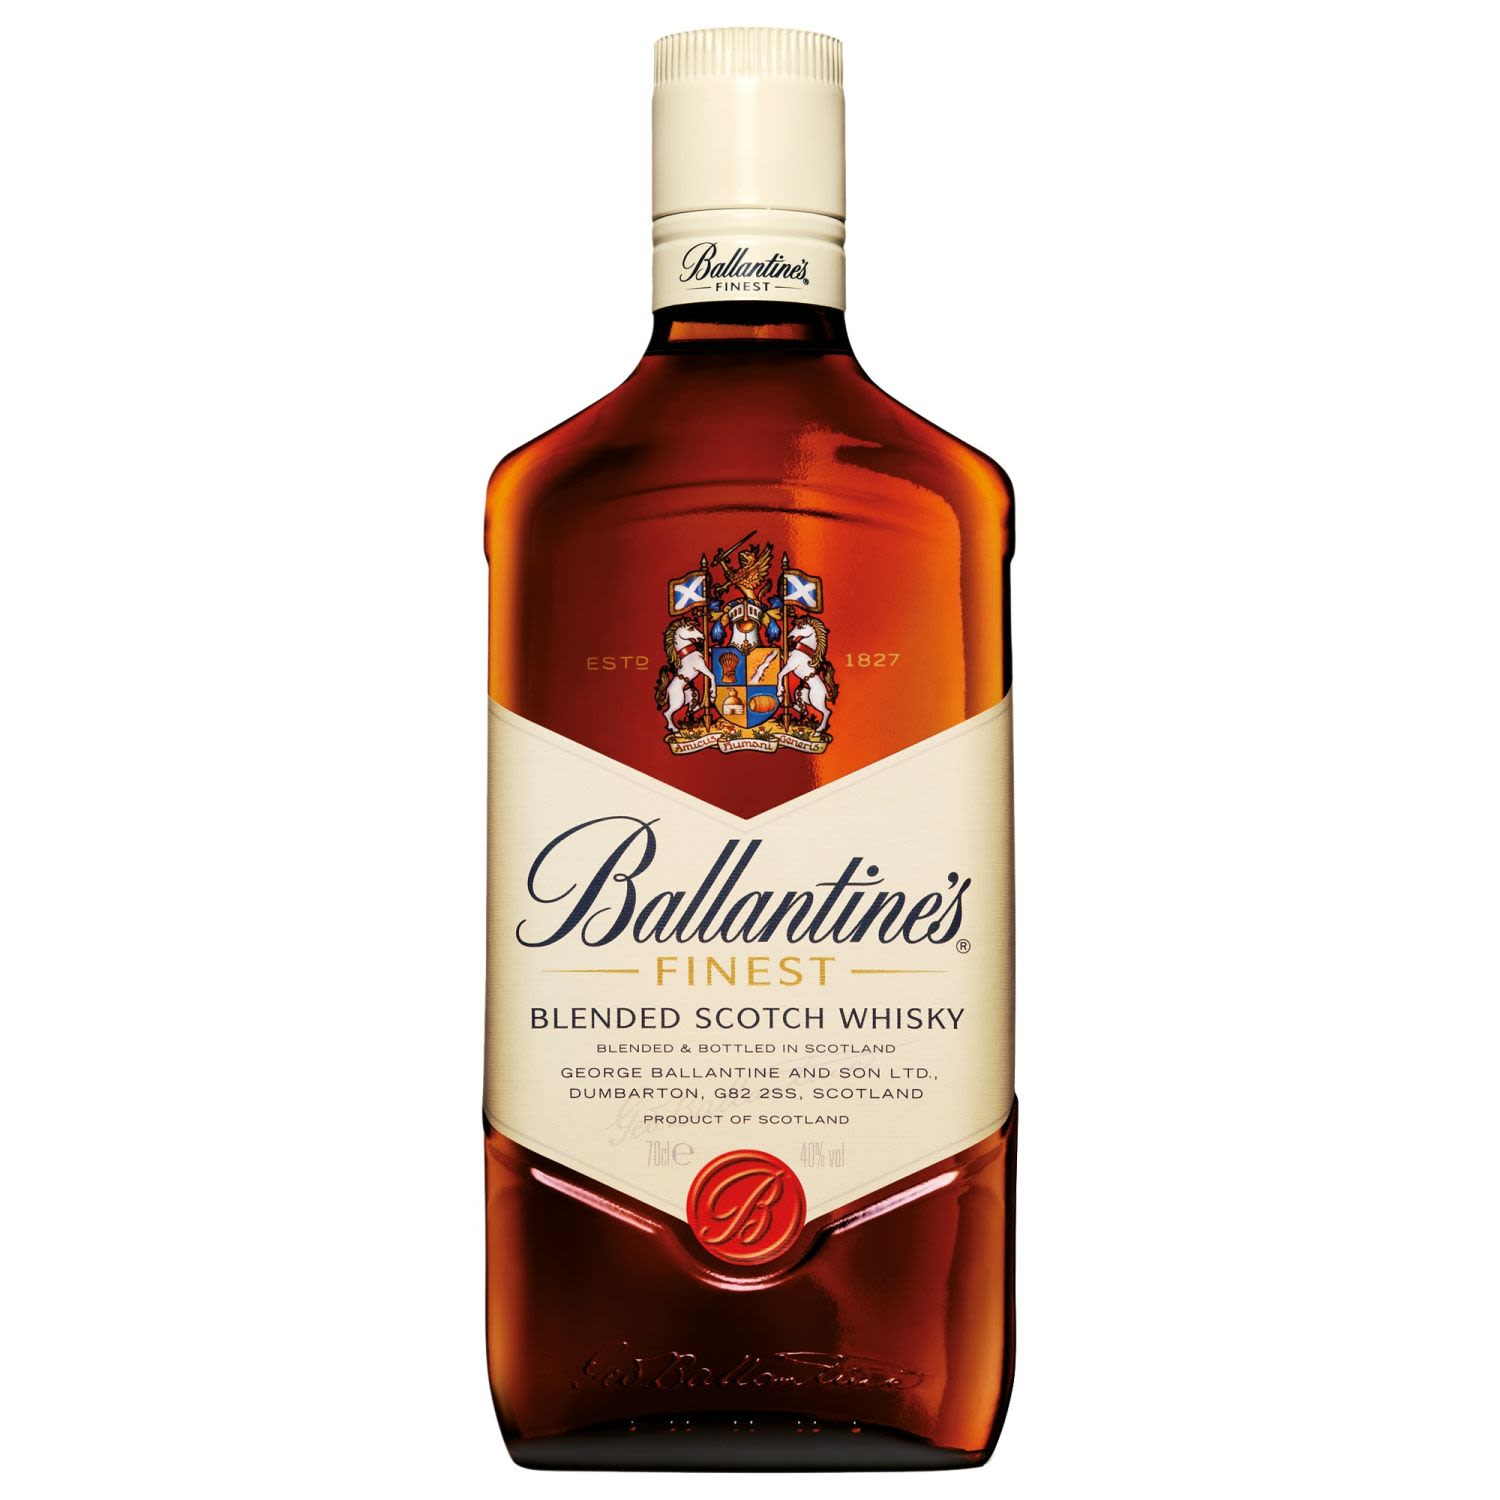 Ballantine's Finest Scotch Whisky is one of the worlds best blended Scotch Whiskys and is blended with 50 single malts, 4 single grains and most important of all those is the signature malts of Miltonduff and Glenburgie.<br /> <br />Alcohol Volume: 40.00%<br /><br />Pack Format: Bottle<br /><br />Standard Drinks: 22</br /><br />Pack Type: Bottle<br /><br />Country of Origin: Scotland<br />